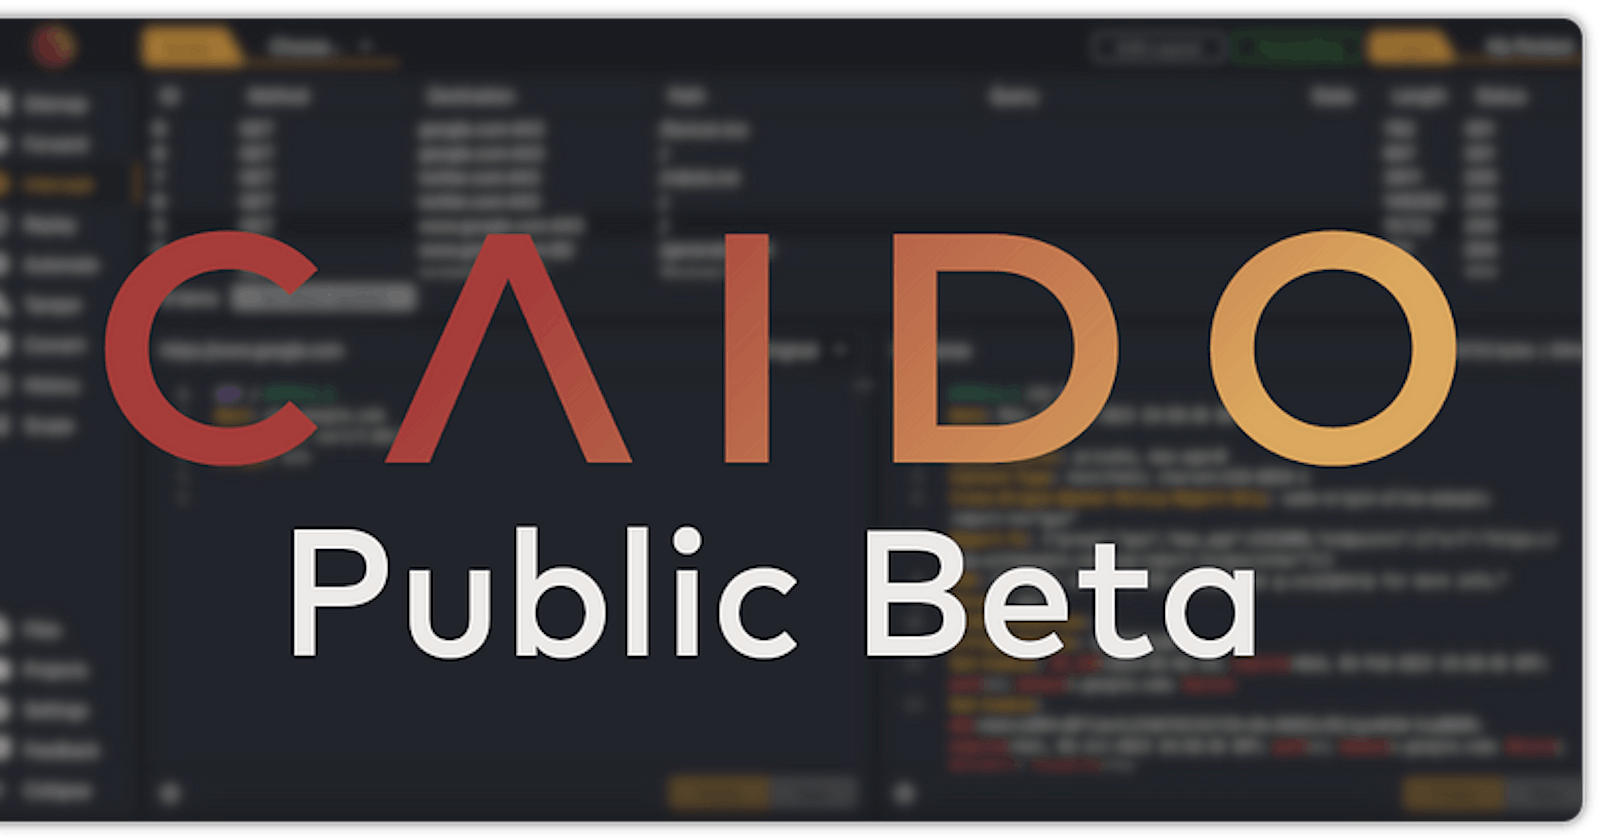 Caido is now in public beta